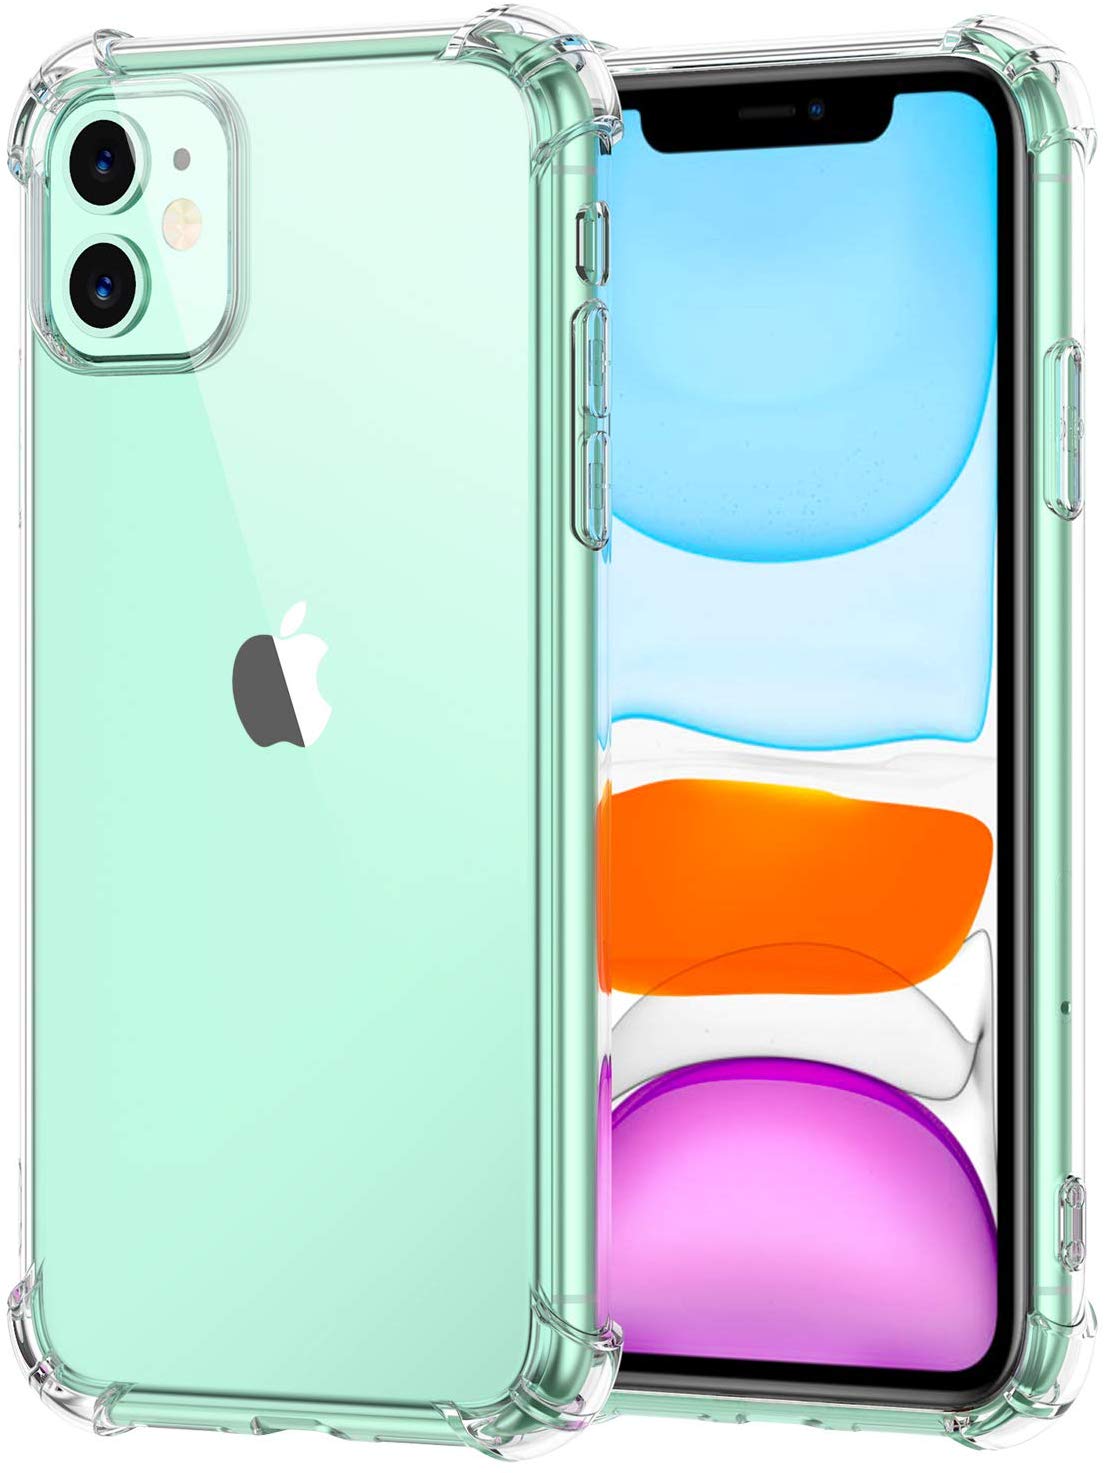 Njjex iPhone 11 / iPhone XR / iPhone 12 Pro Max Case, Njjex iPhone 11 Pro Crystal Clear Shock Absorption Technology Bumper Soft TPU Cover Case For Apple iPhone 11, 12 Mini, 12 Pro Max - image 1 of 6